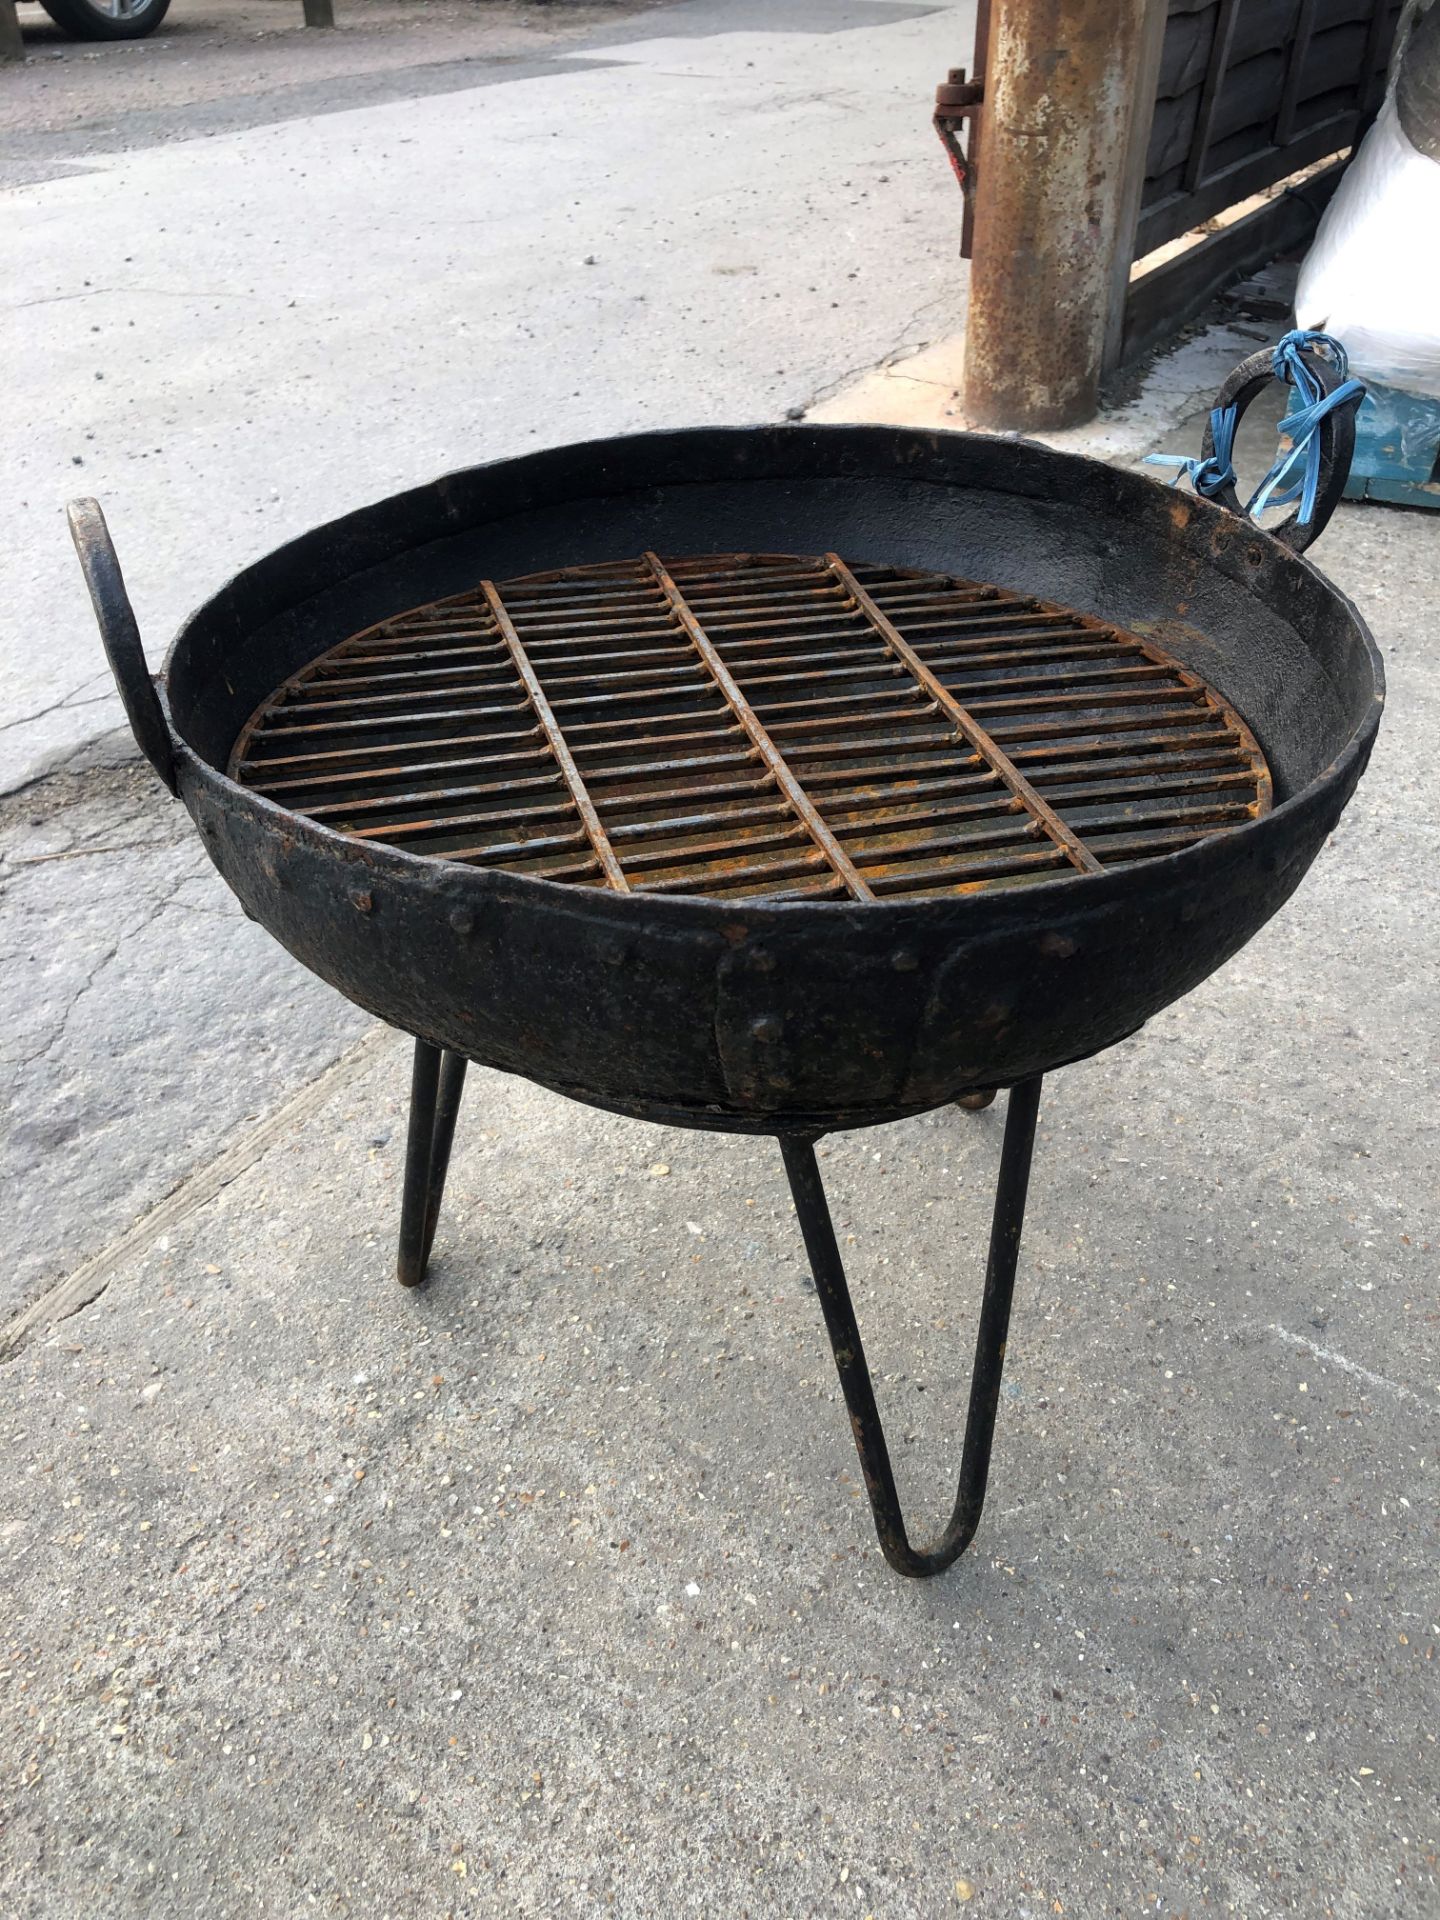 *FIRE PIT ON STAND - 48CM (DIA) X 39CM (H) / COLLECTION LOCATION: WELLERS AUCTIONS (GU1 4SJ)